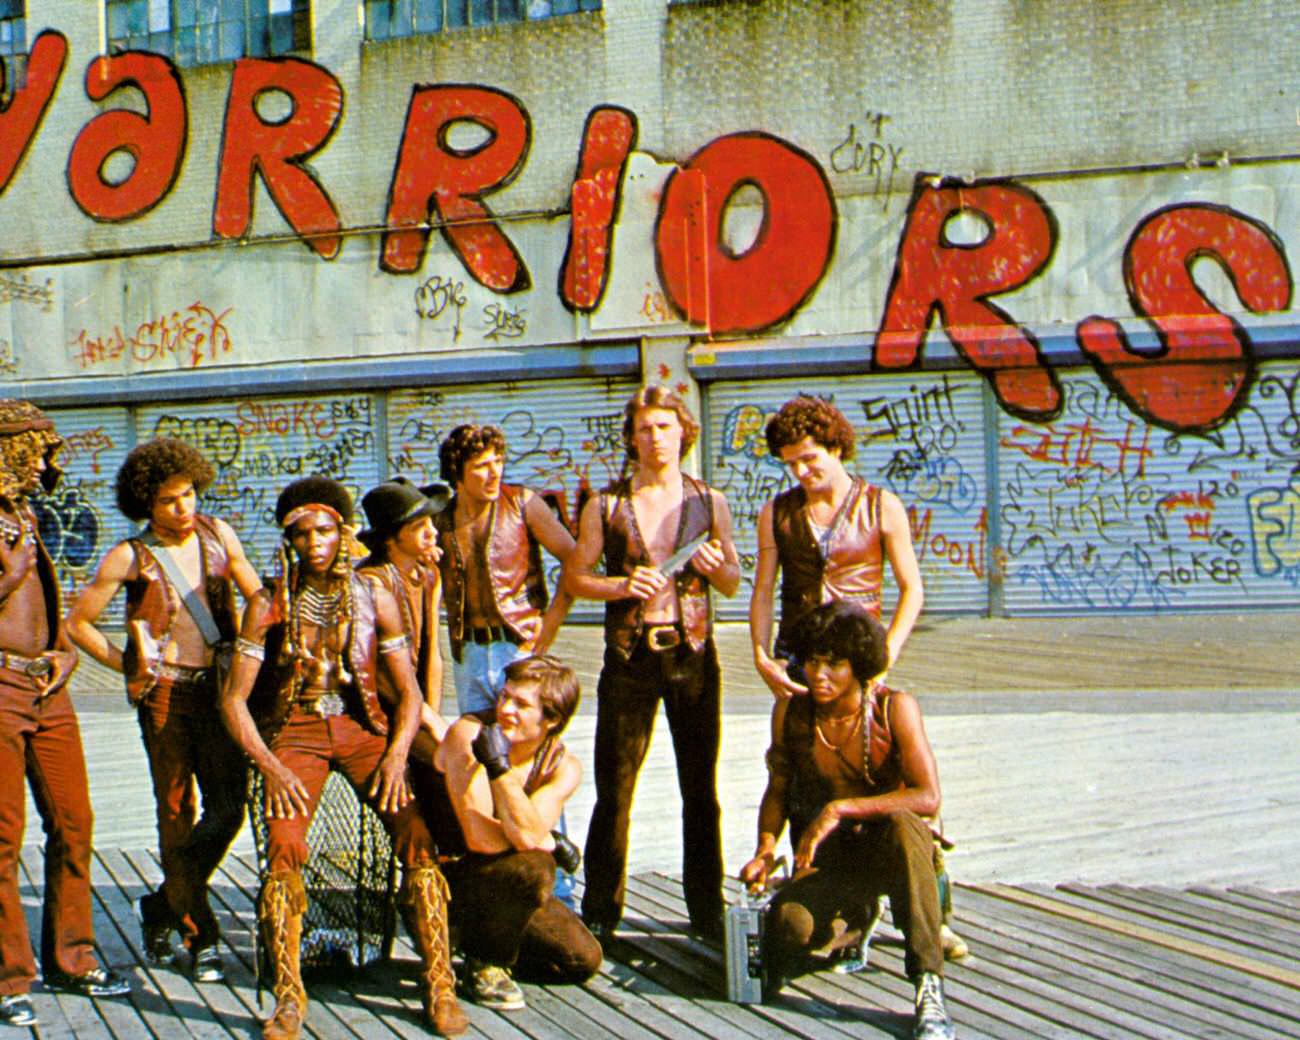 Cast Of 'The Warriors' Pose In Front Of Graffiti-Covered Store Fronts At Coney Island, Brooklyn, 1979